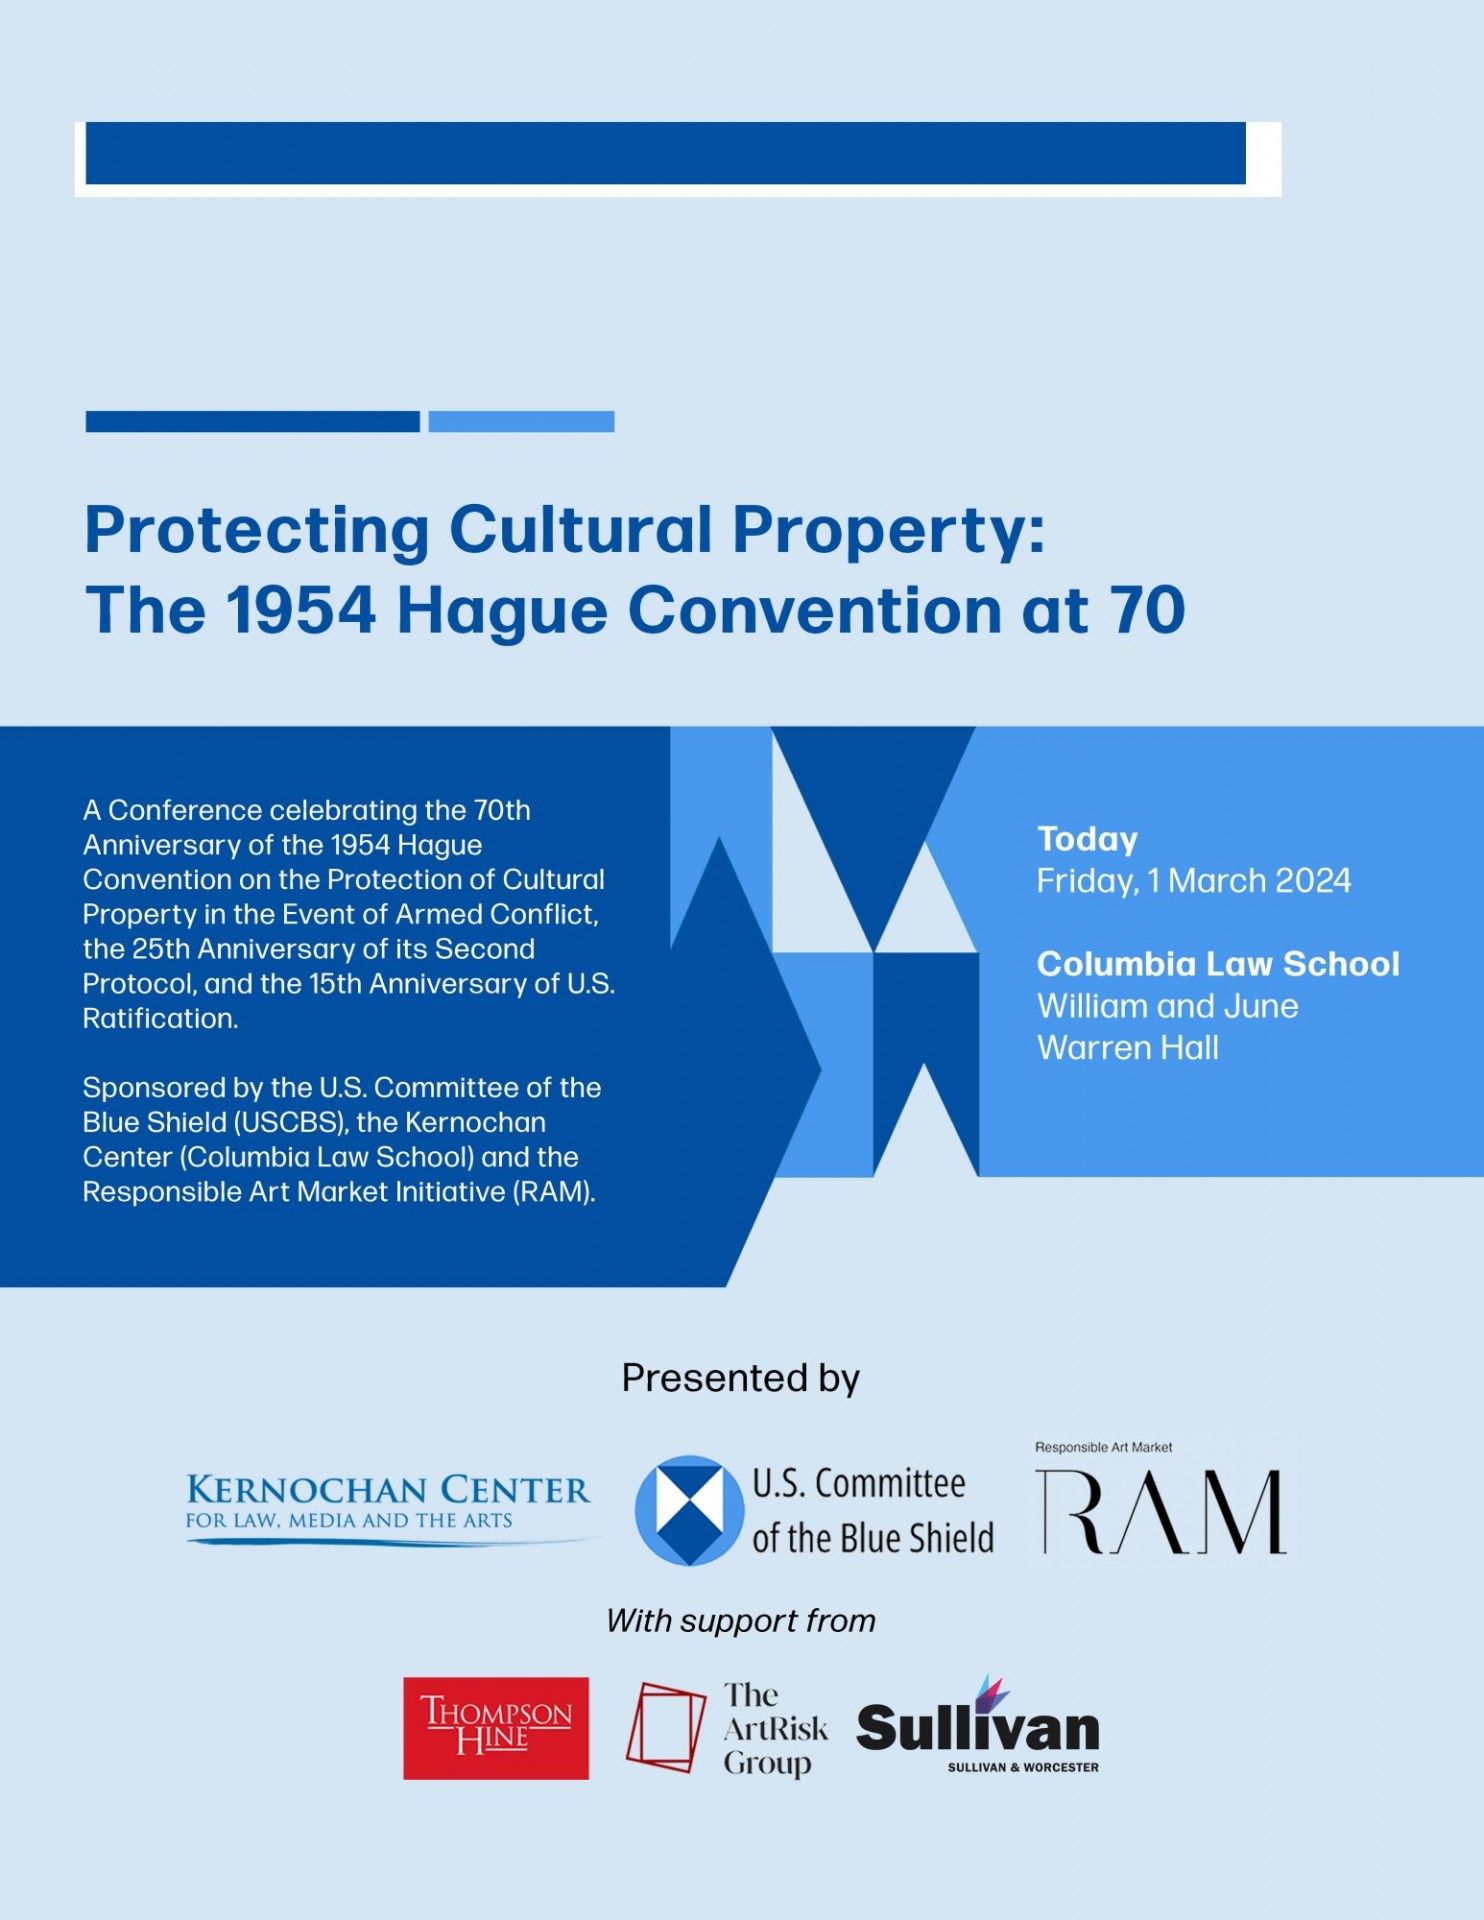 Art Law Symposium 2024: Protecting Cultural Property: The 1954 Hague Convention at 70